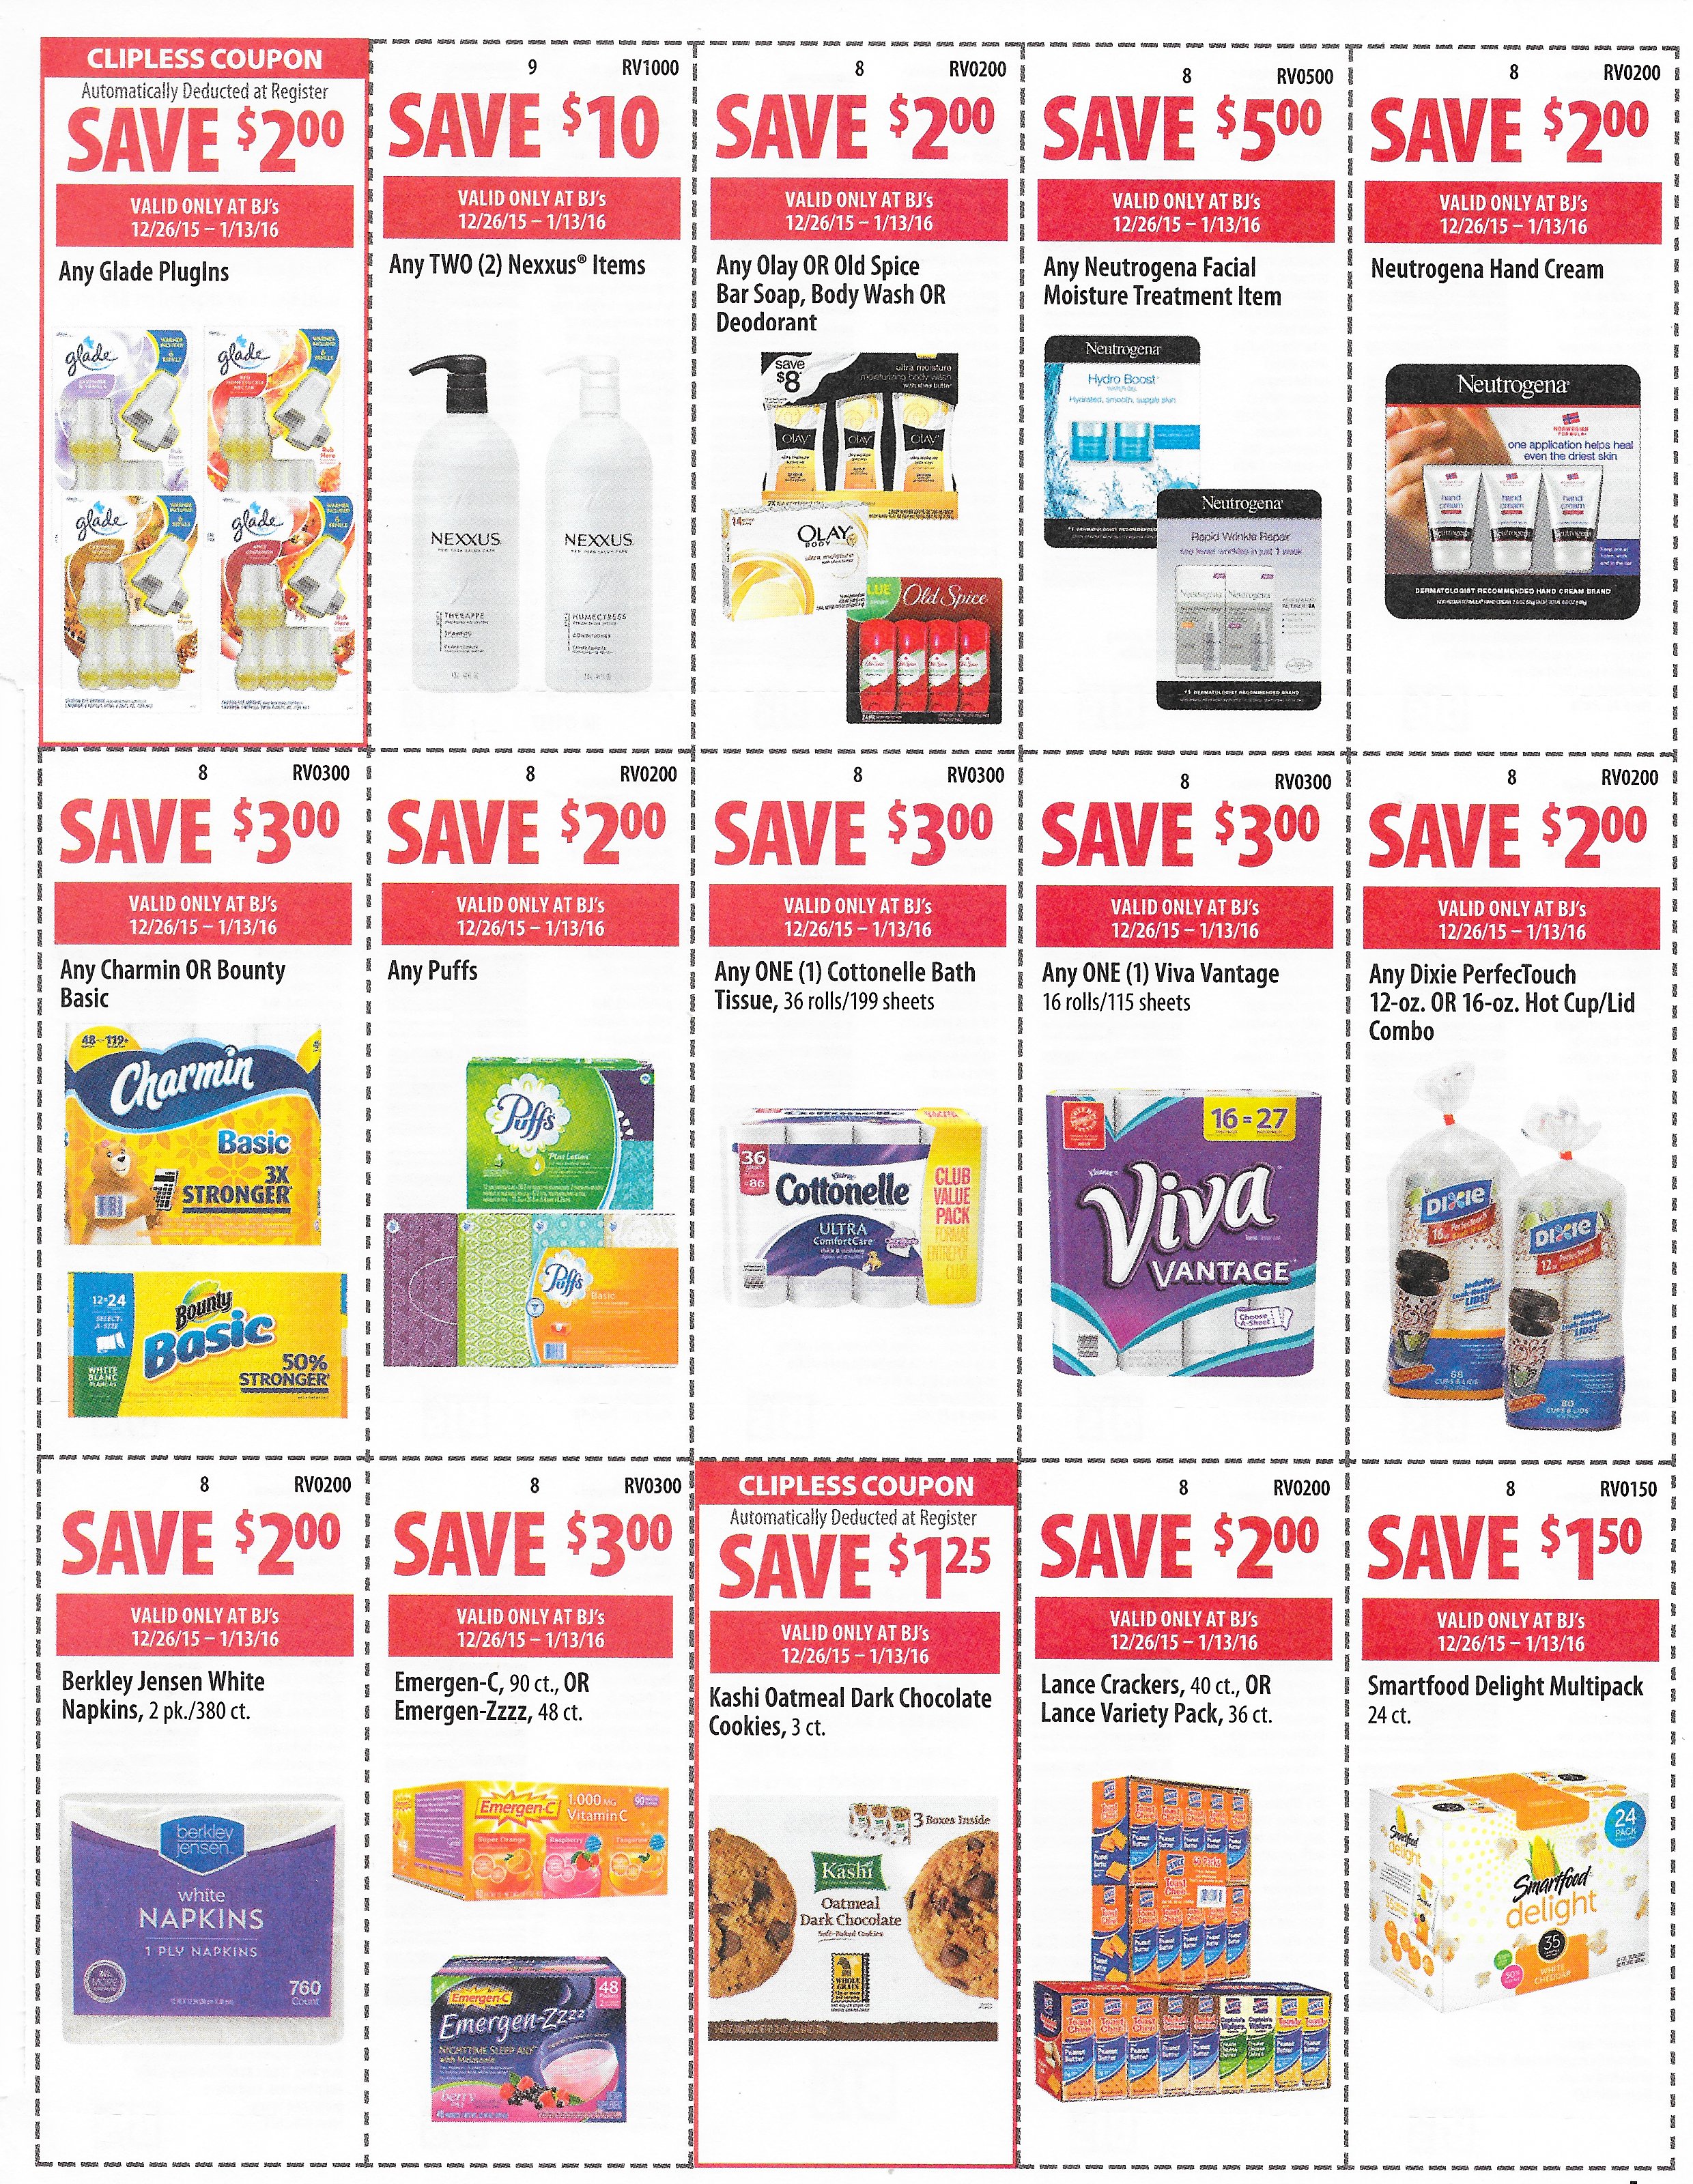 BJ's Wholesale Club Coupons